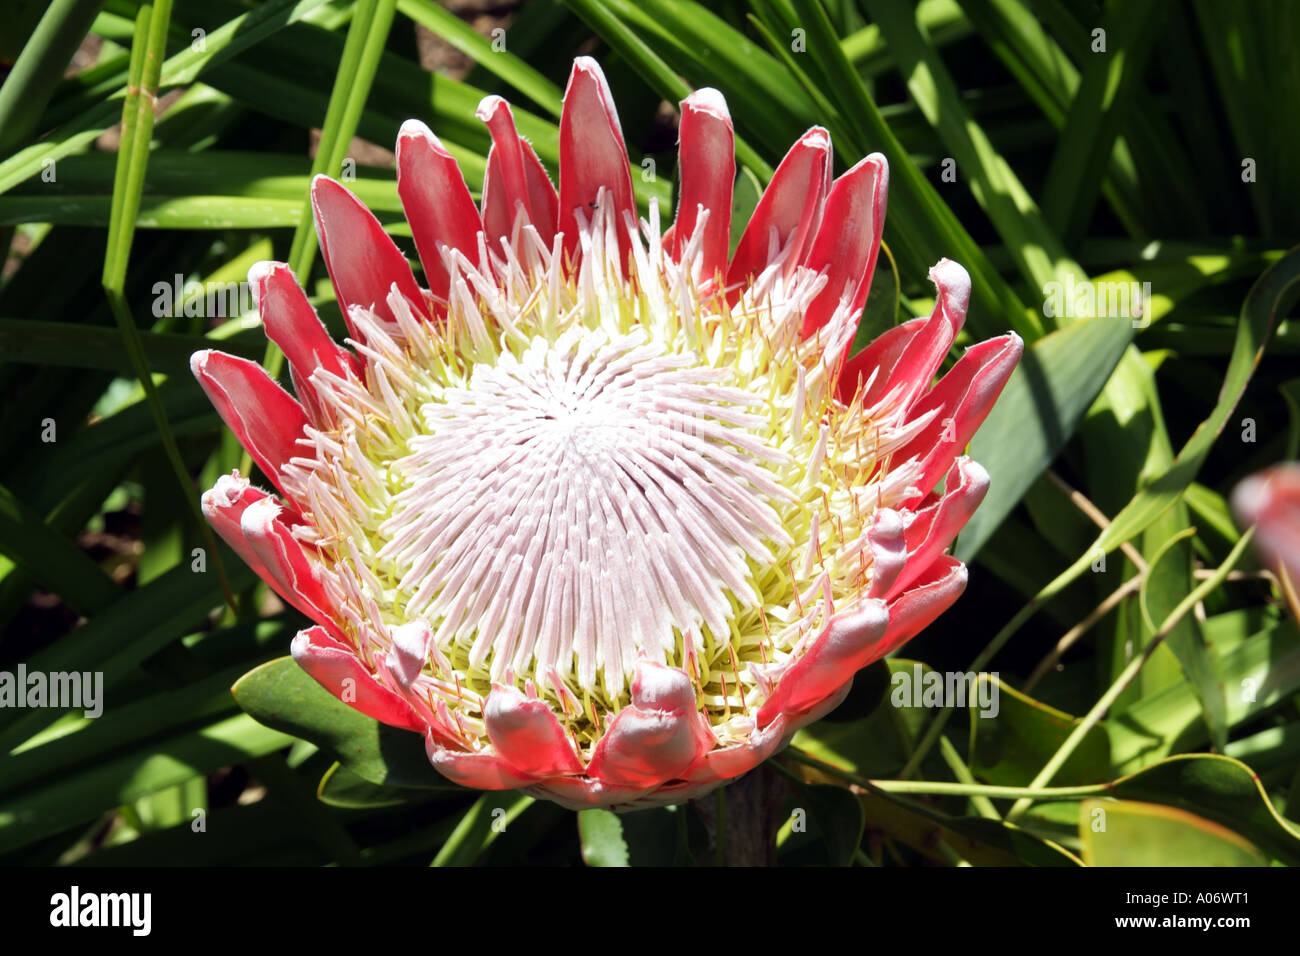 King Protea the national flower of South Africa RSA Kirstenbosch Botanical Gardens Cape Town Stock Photo